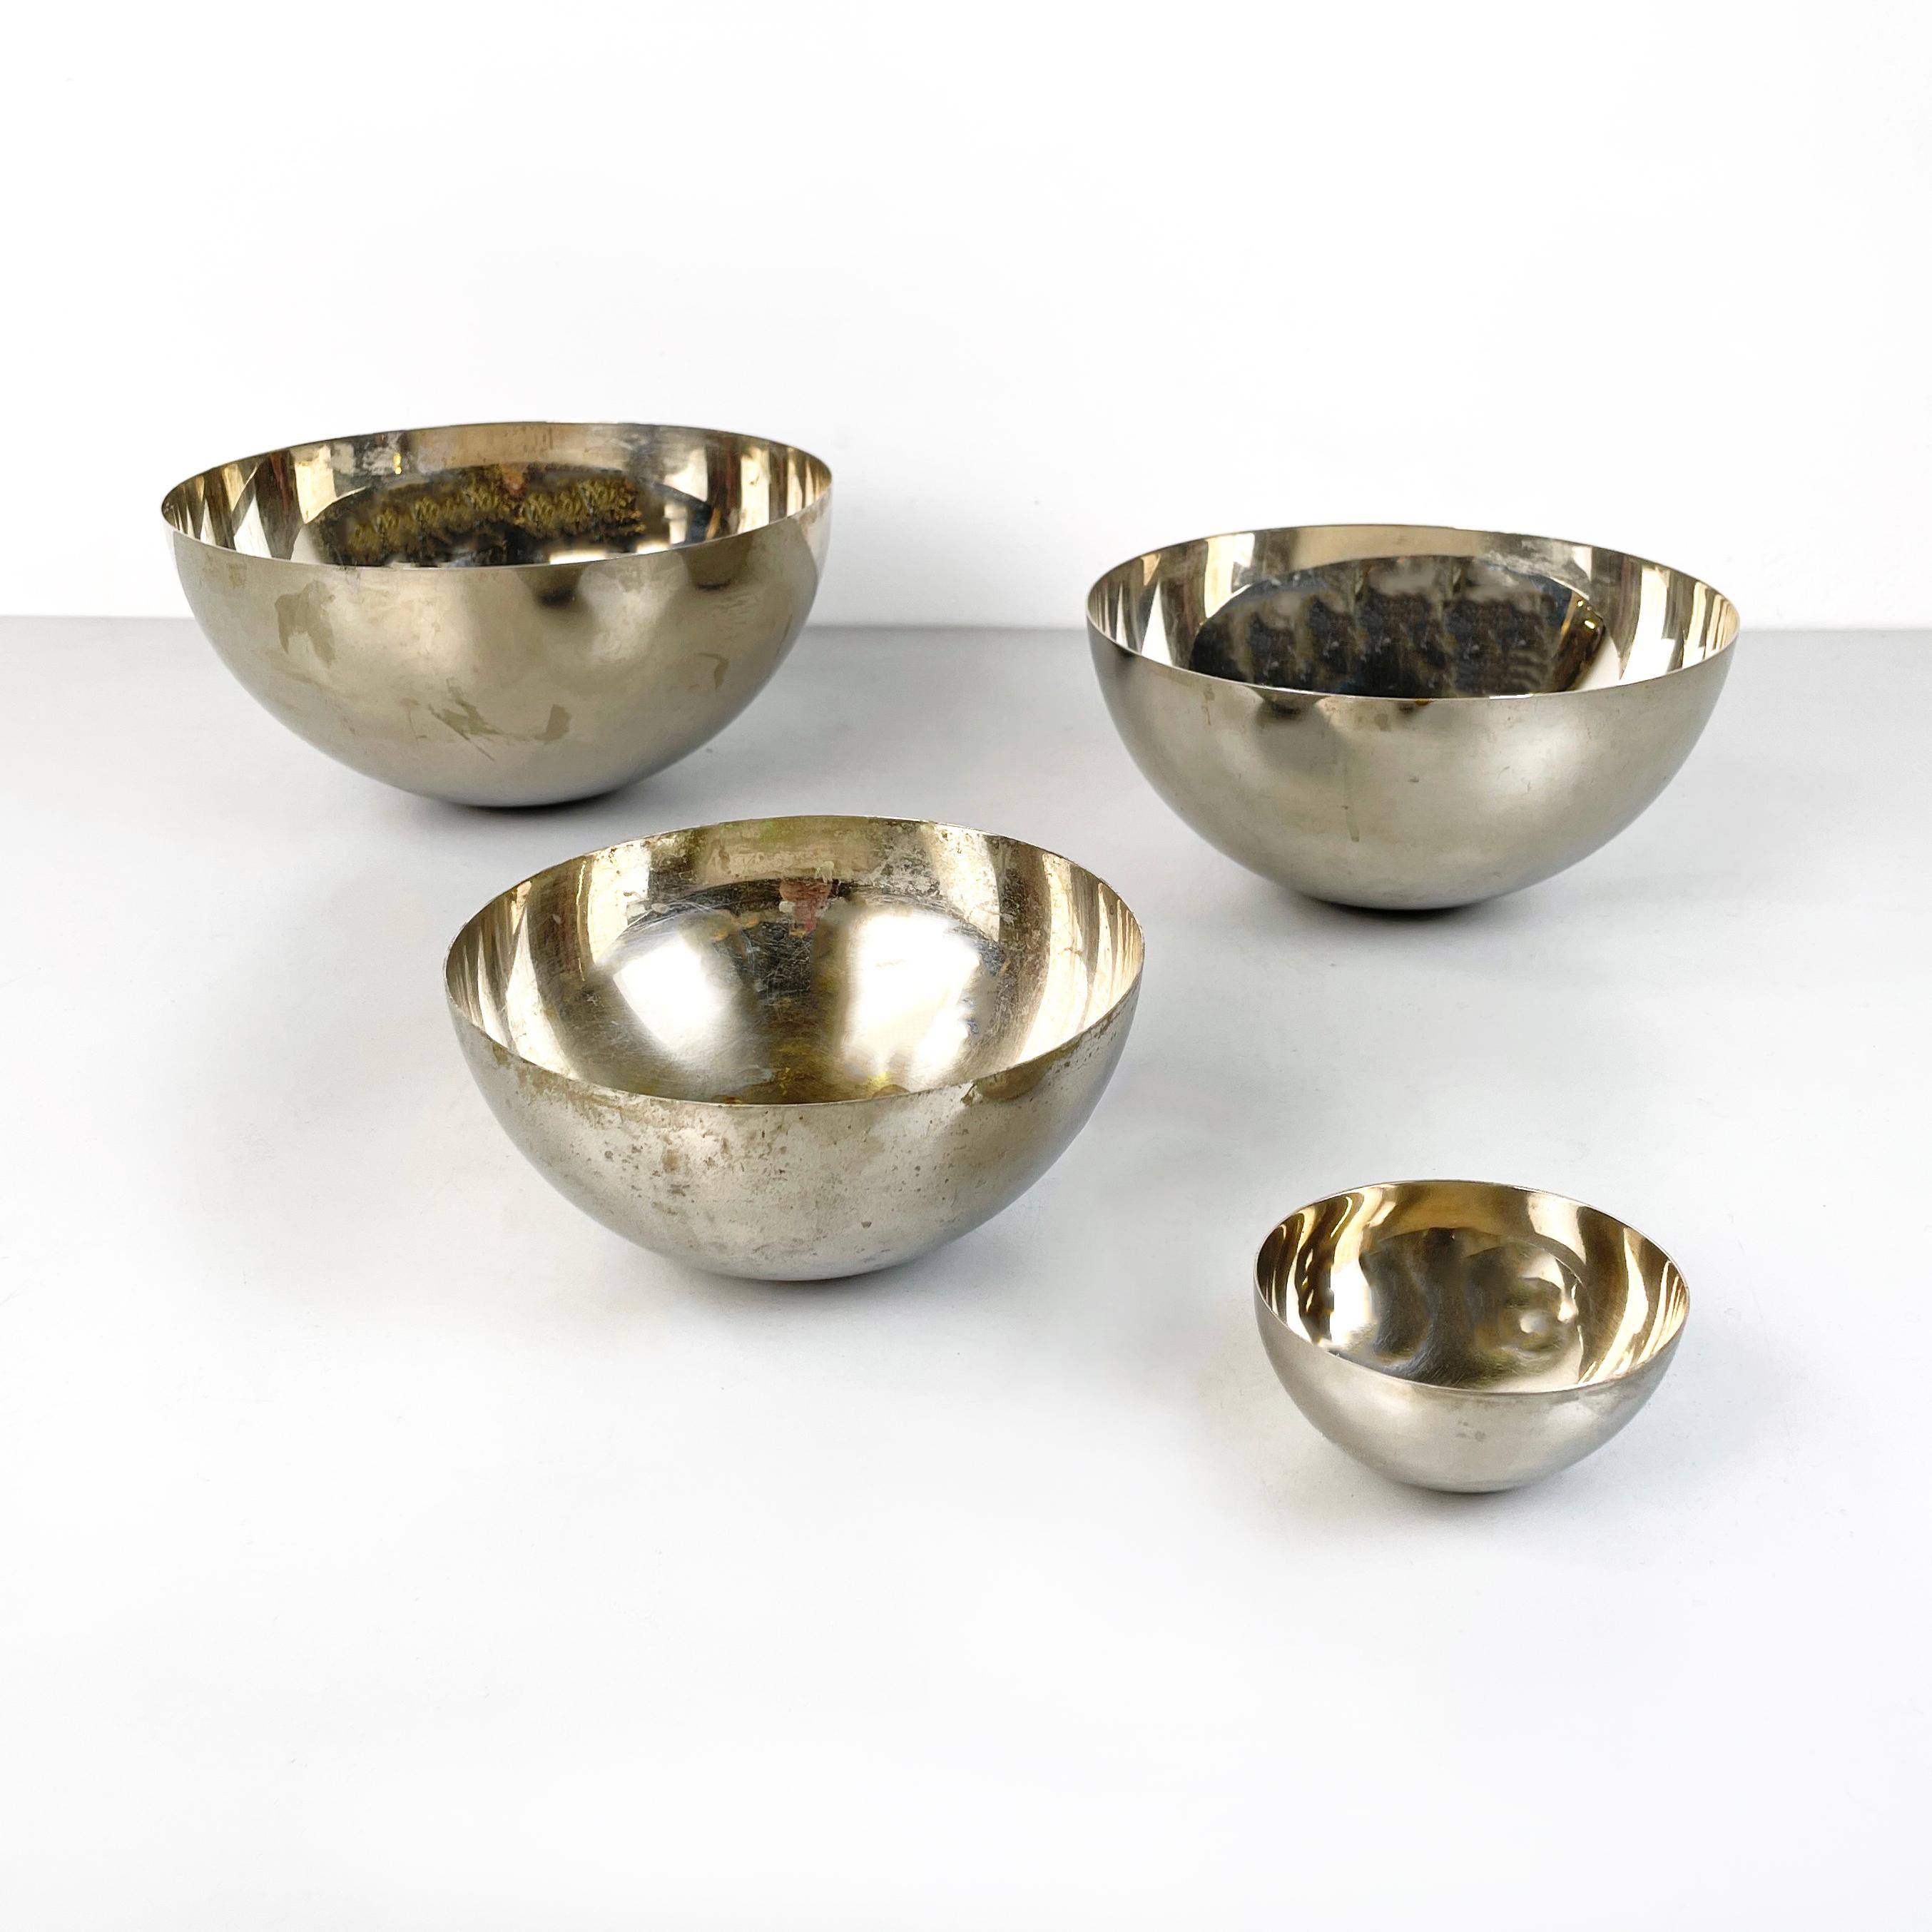 Italian mid-century modern metal hemisphere serving bowls by Danese, 1970s
Set of 4 metal hemisphere bowls with internal chrome finish and external satin finish. These cups, thanks to their different sizes, can be inserted inside each other. They